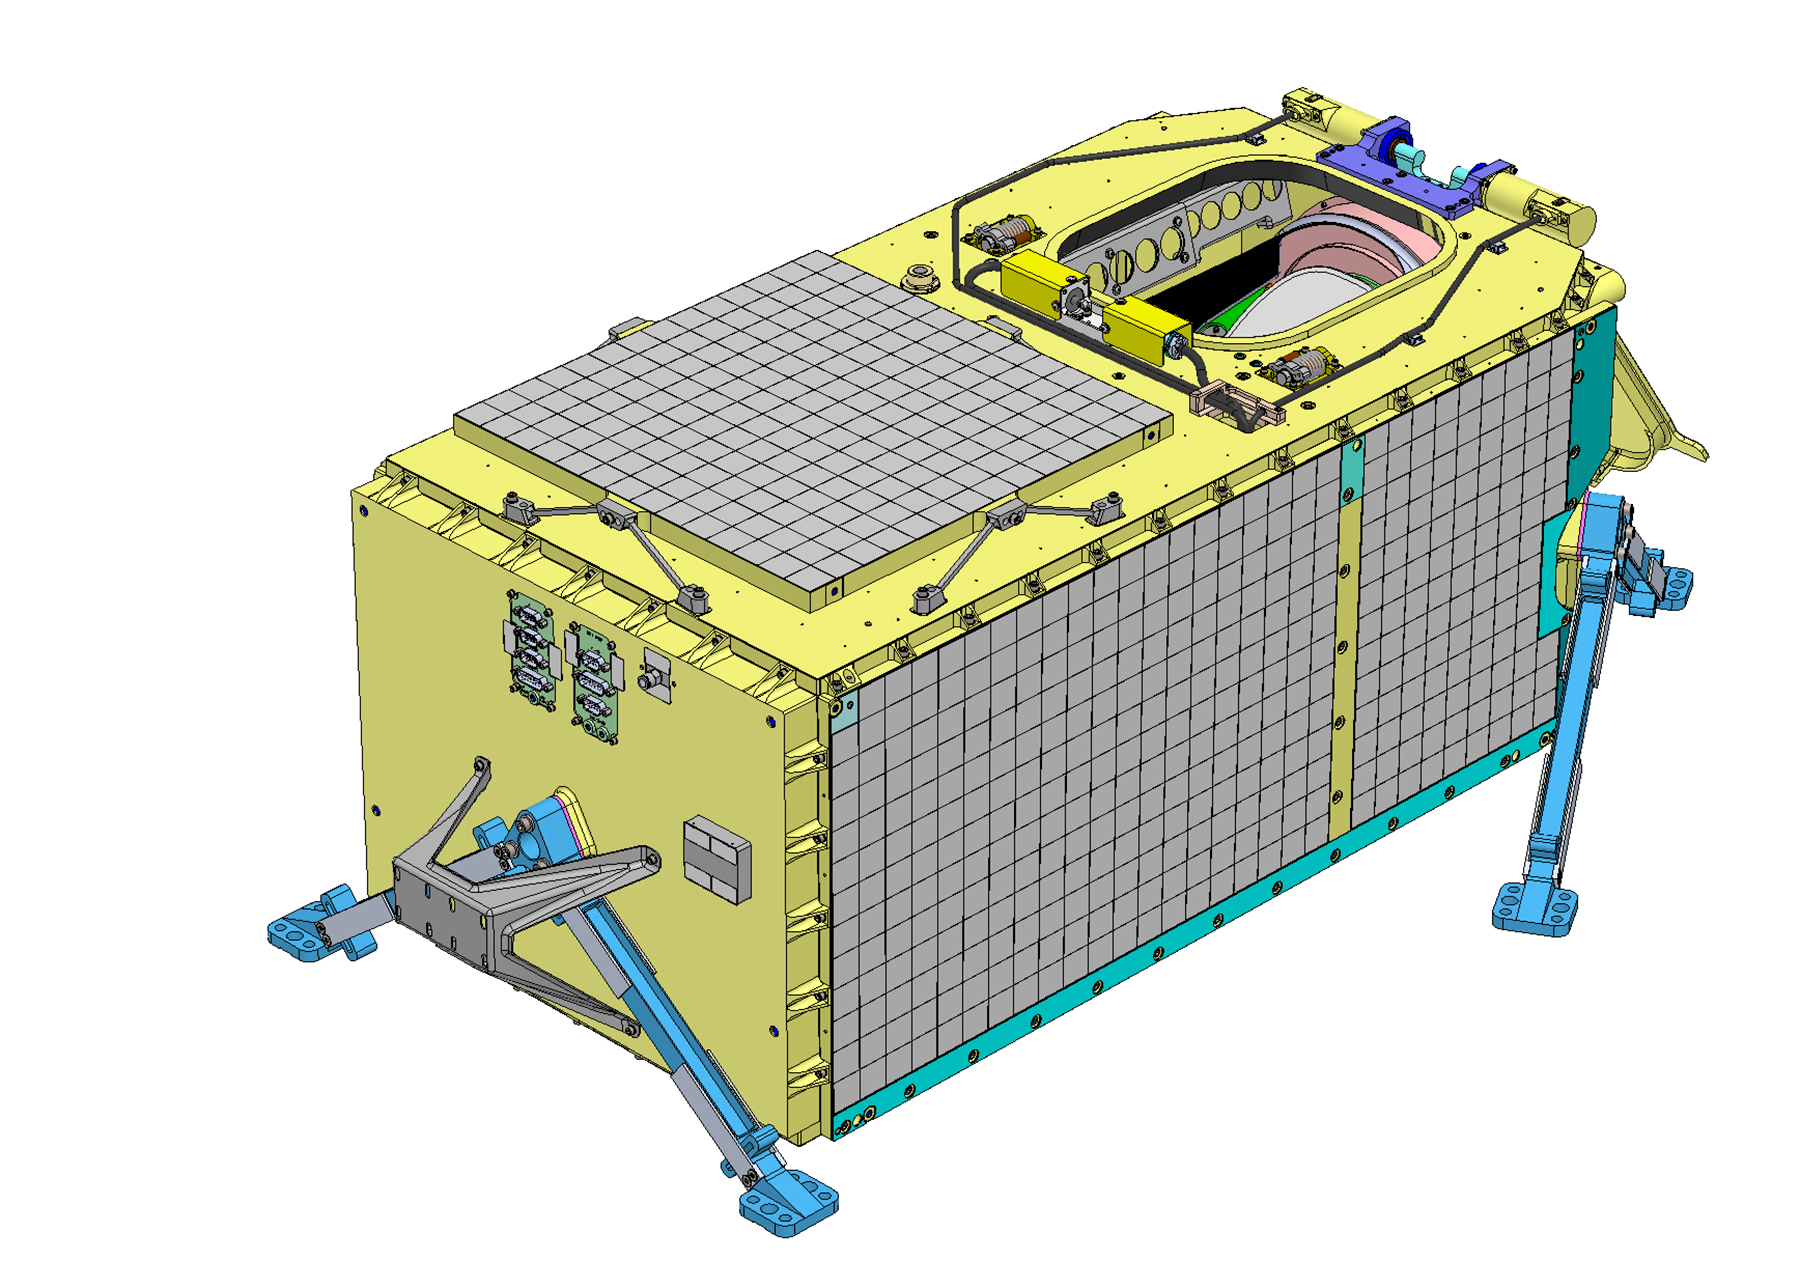 Illustration of the SĀCHI. Payload size is 45 × 31 × 19 inches, with a mass of 154 pounds.